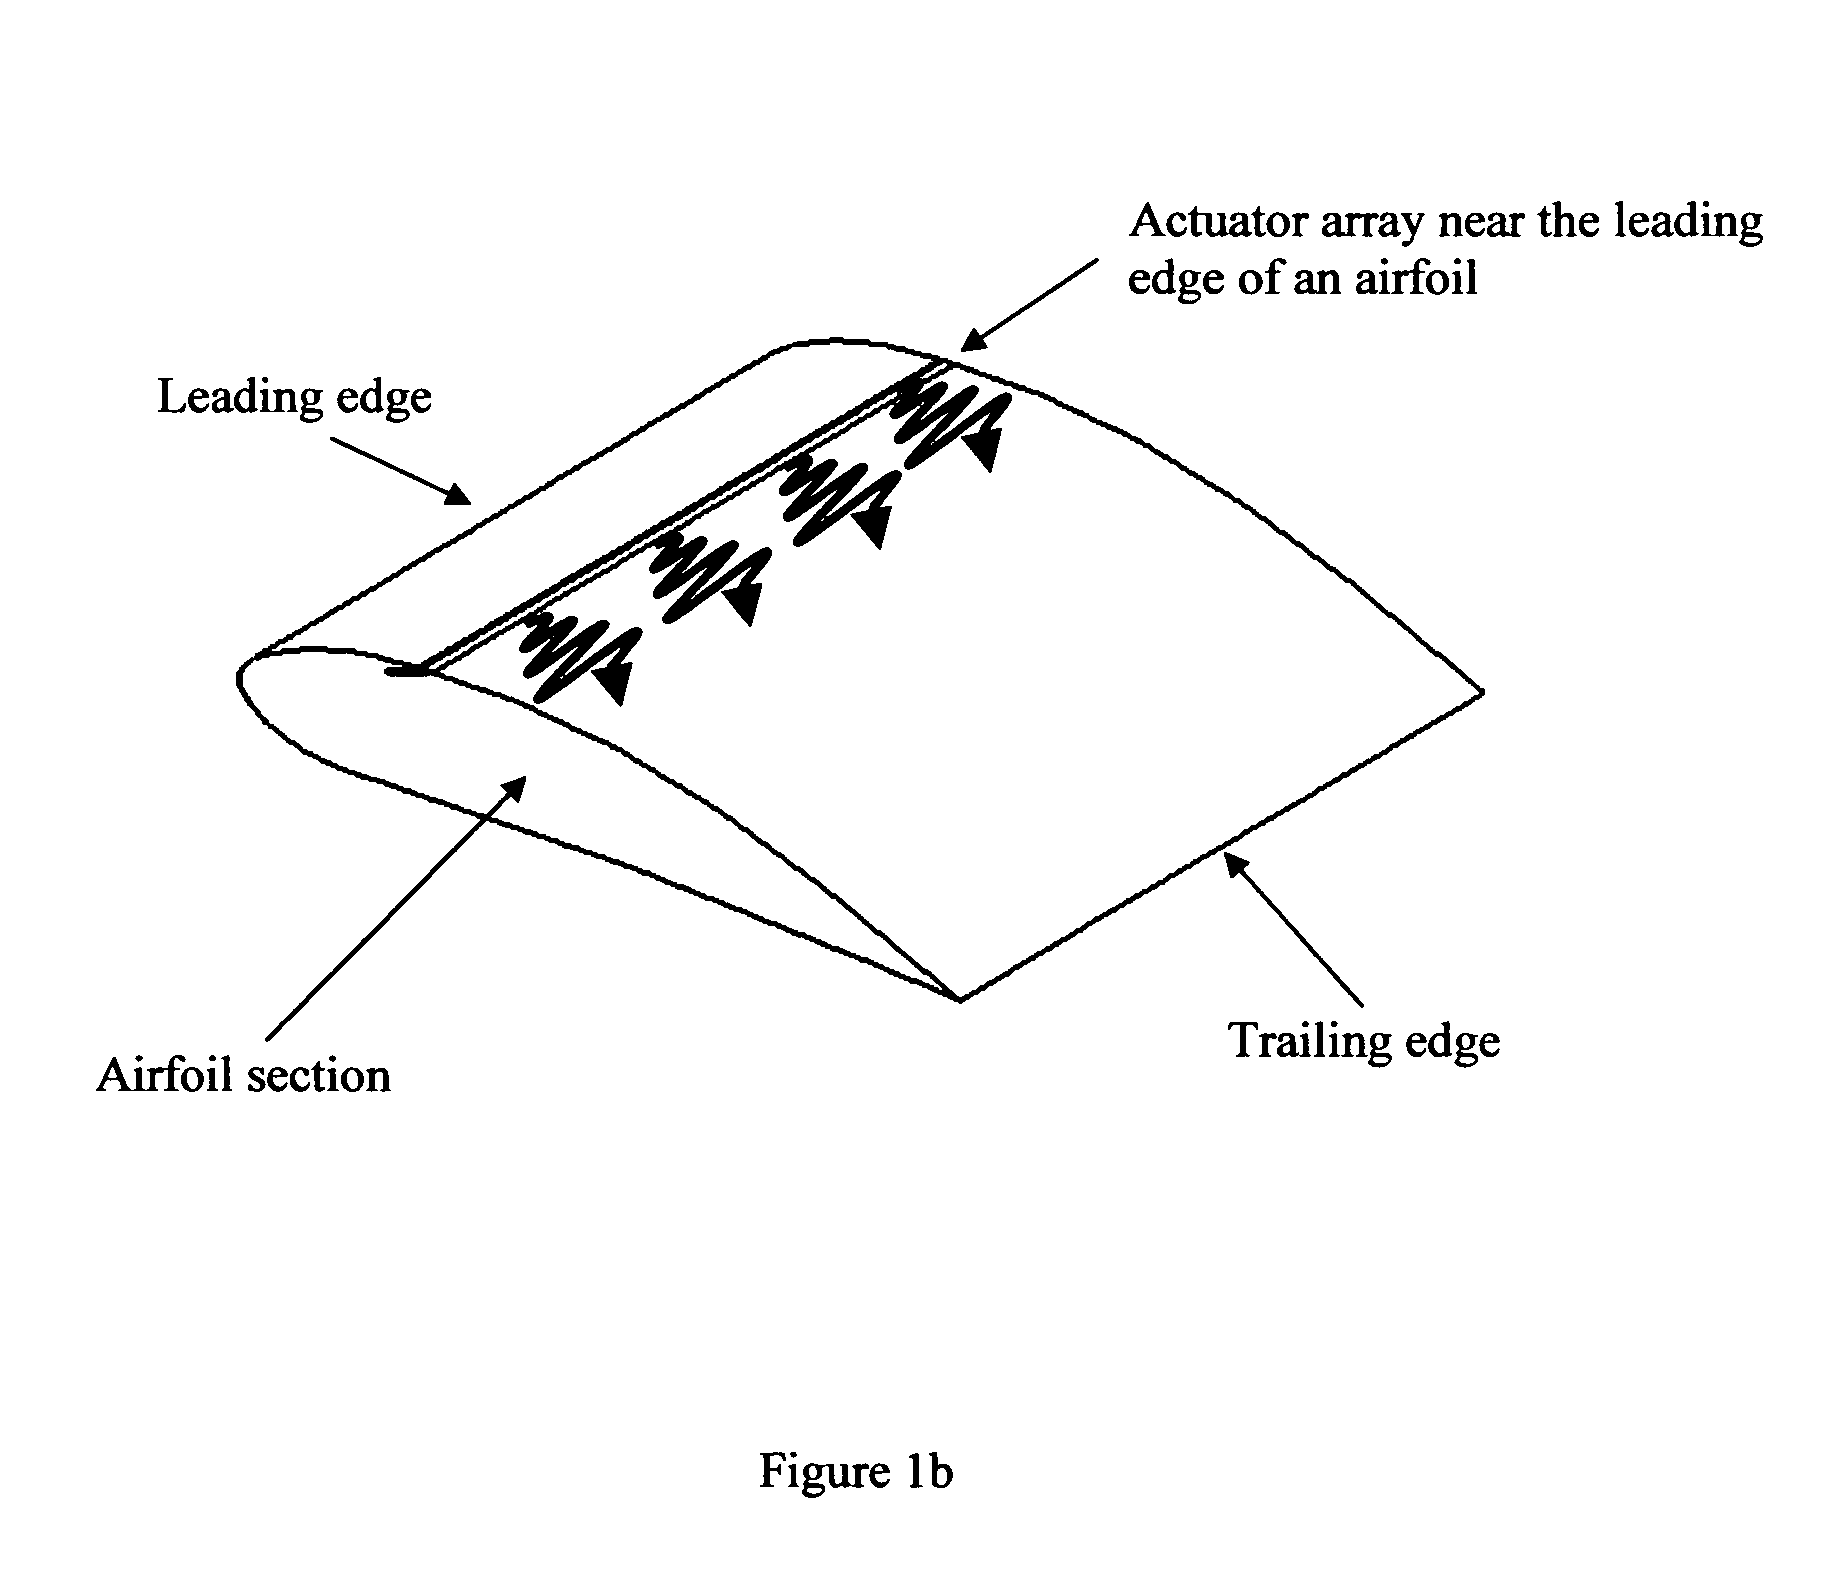 Method and apparatus for aerodynamic flow control using compact high-frequency fluidic actuator arrays